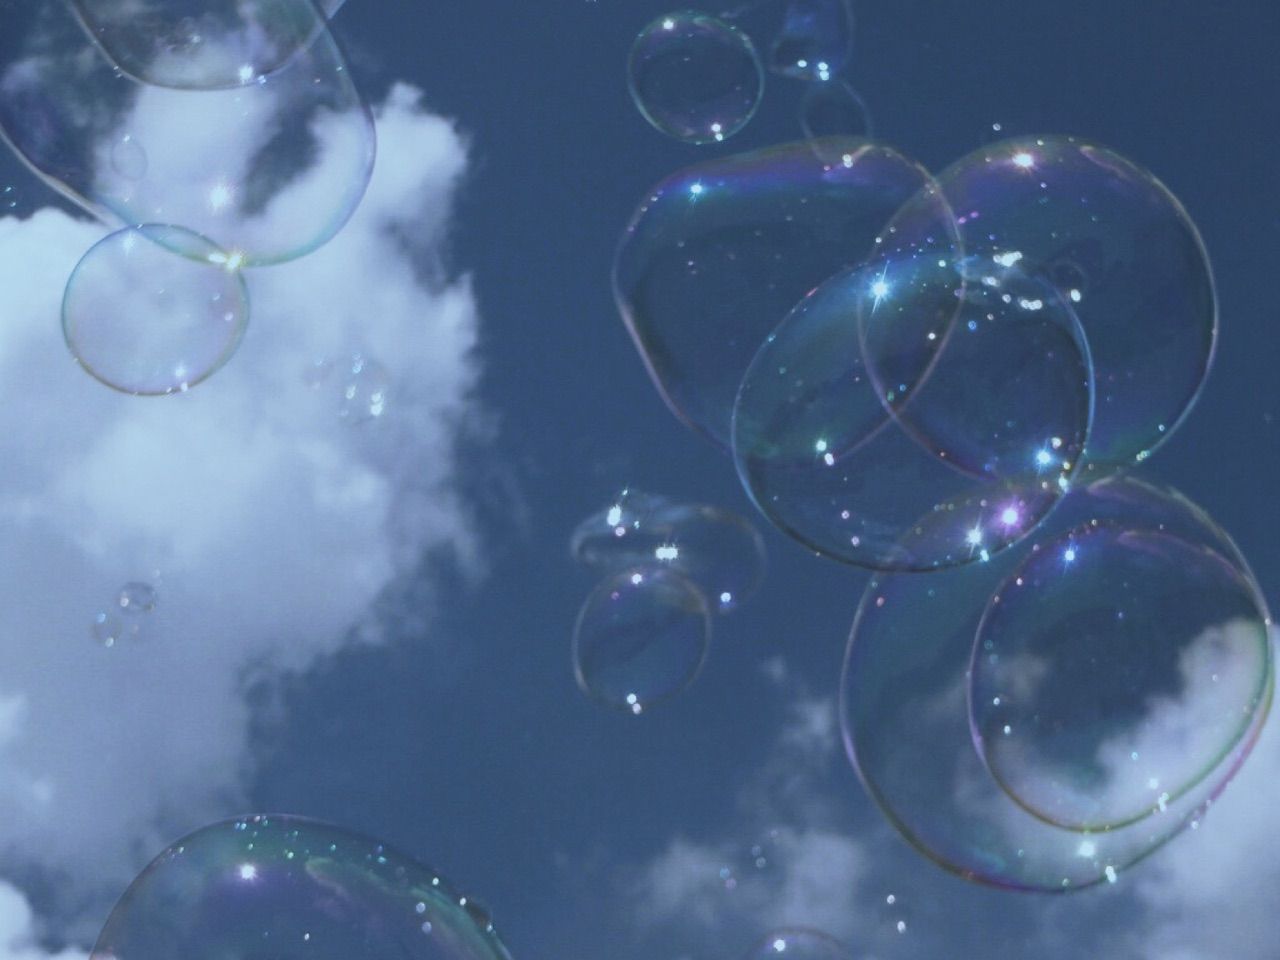 Bubbles floating in the air with a blue sky and white clouds in the background. - Bubbles